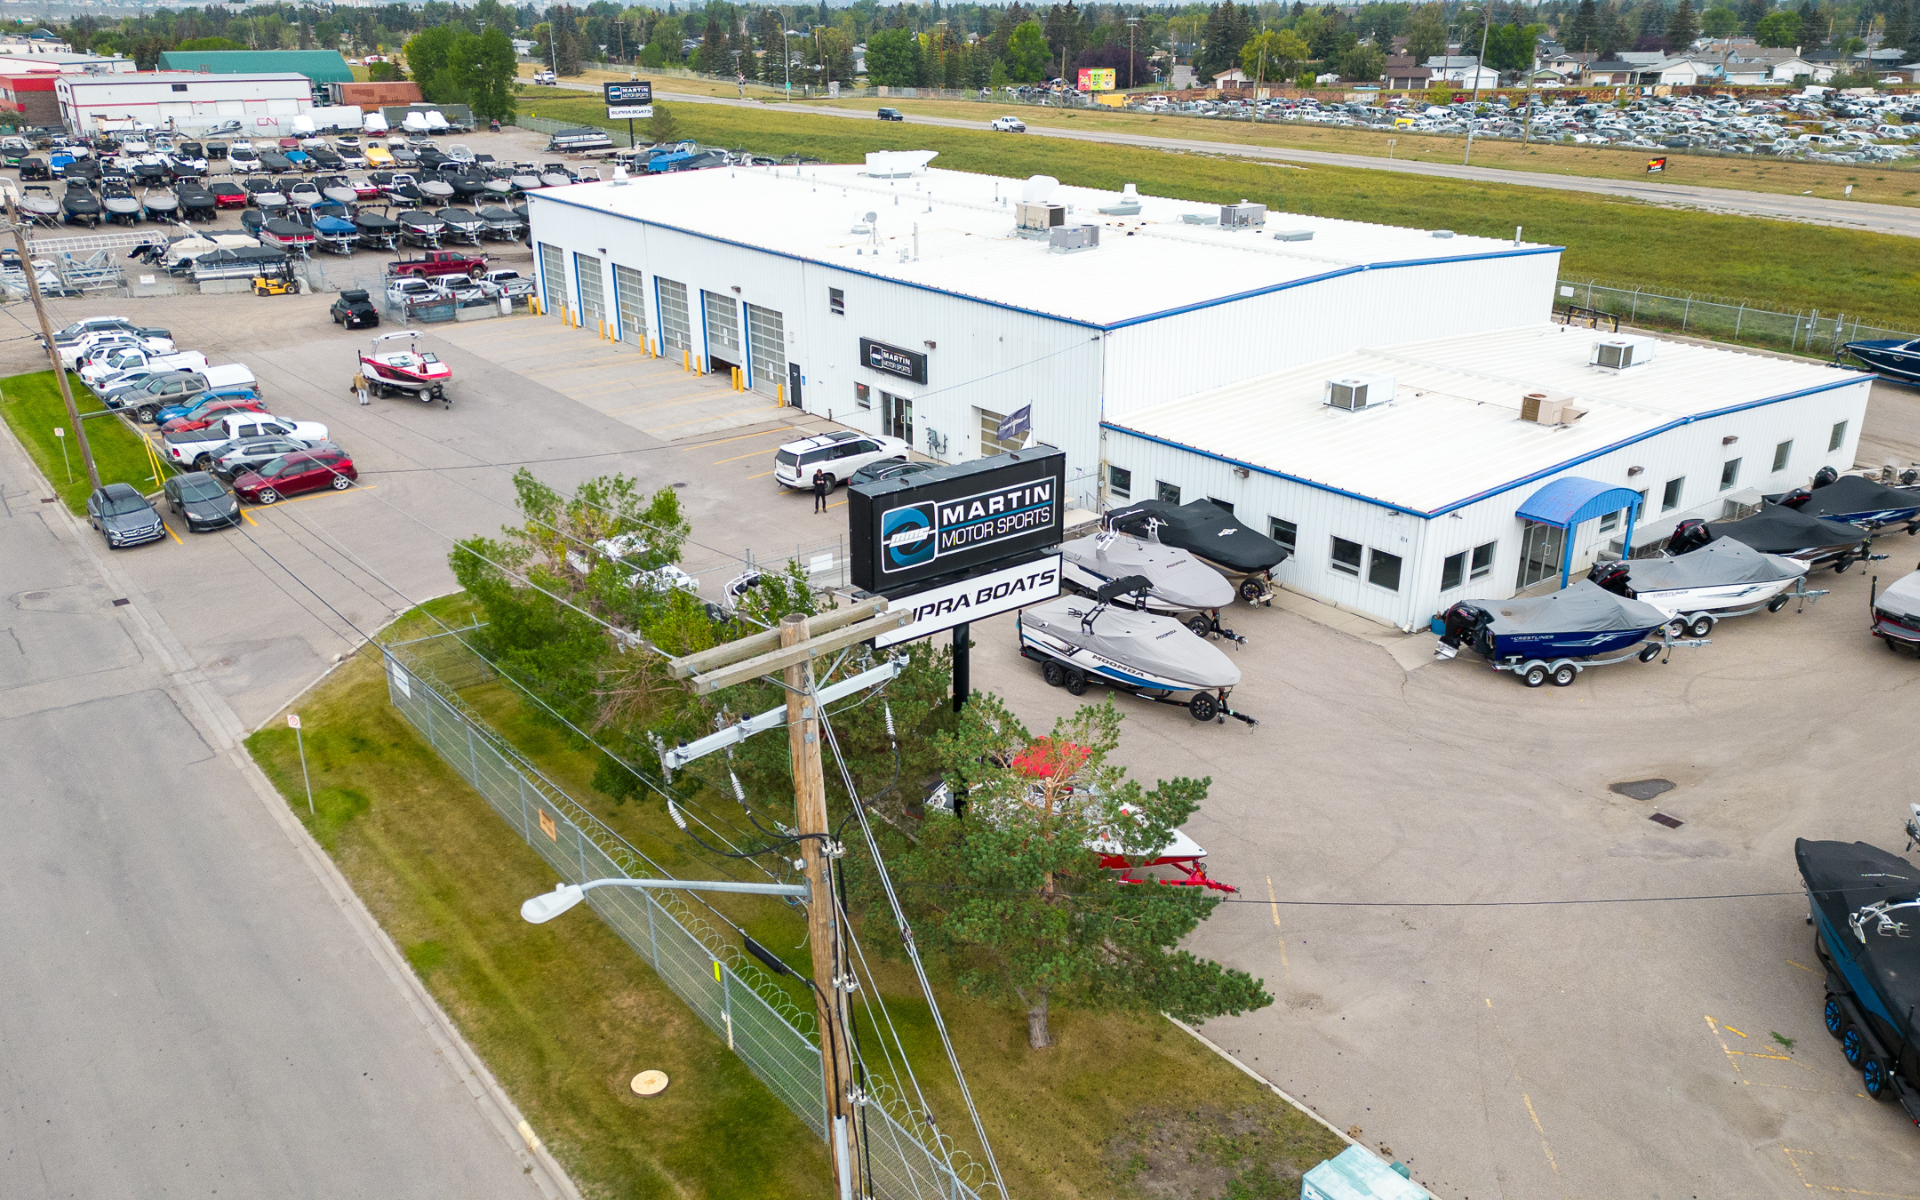 Aerial view of Martin Motor Sports facility in Calgary